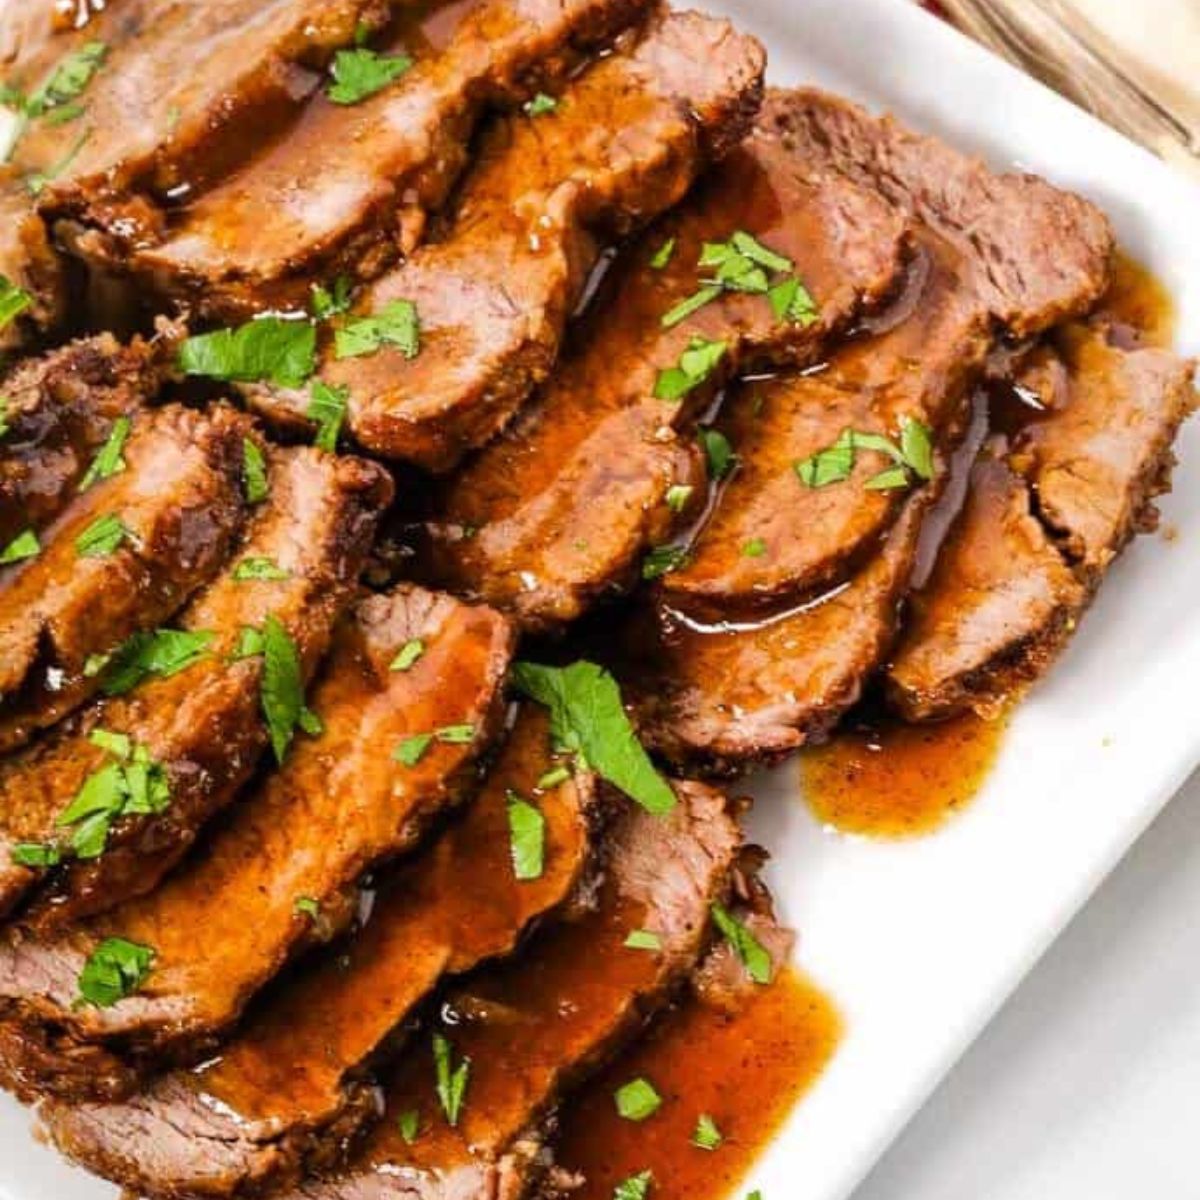 Sliced roast beef topped with gravy, garnished with chopped parsley on a white plate, featured in our recipe index.